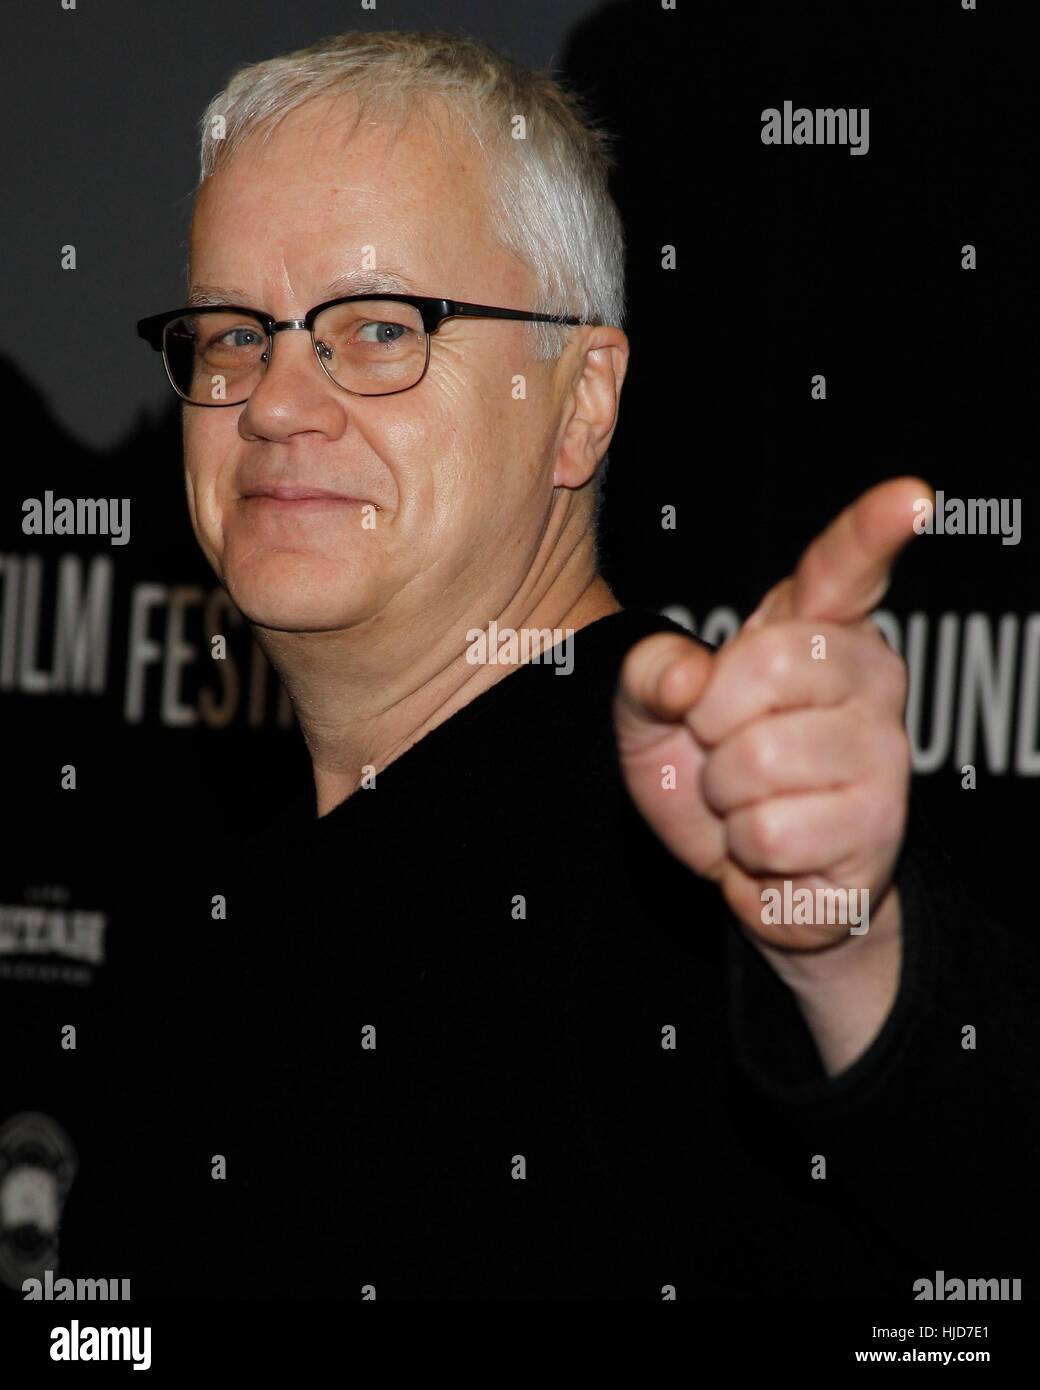 Park City, USA. 23rd Jan, 2017. Tim Robbins at arrivals for 'Marjorie Prime' Premiere during the Sundance Film Festival2017 in Park City, Utah. Credit: James Atoa/Everett Collection/Alamy Live News Stock Photo